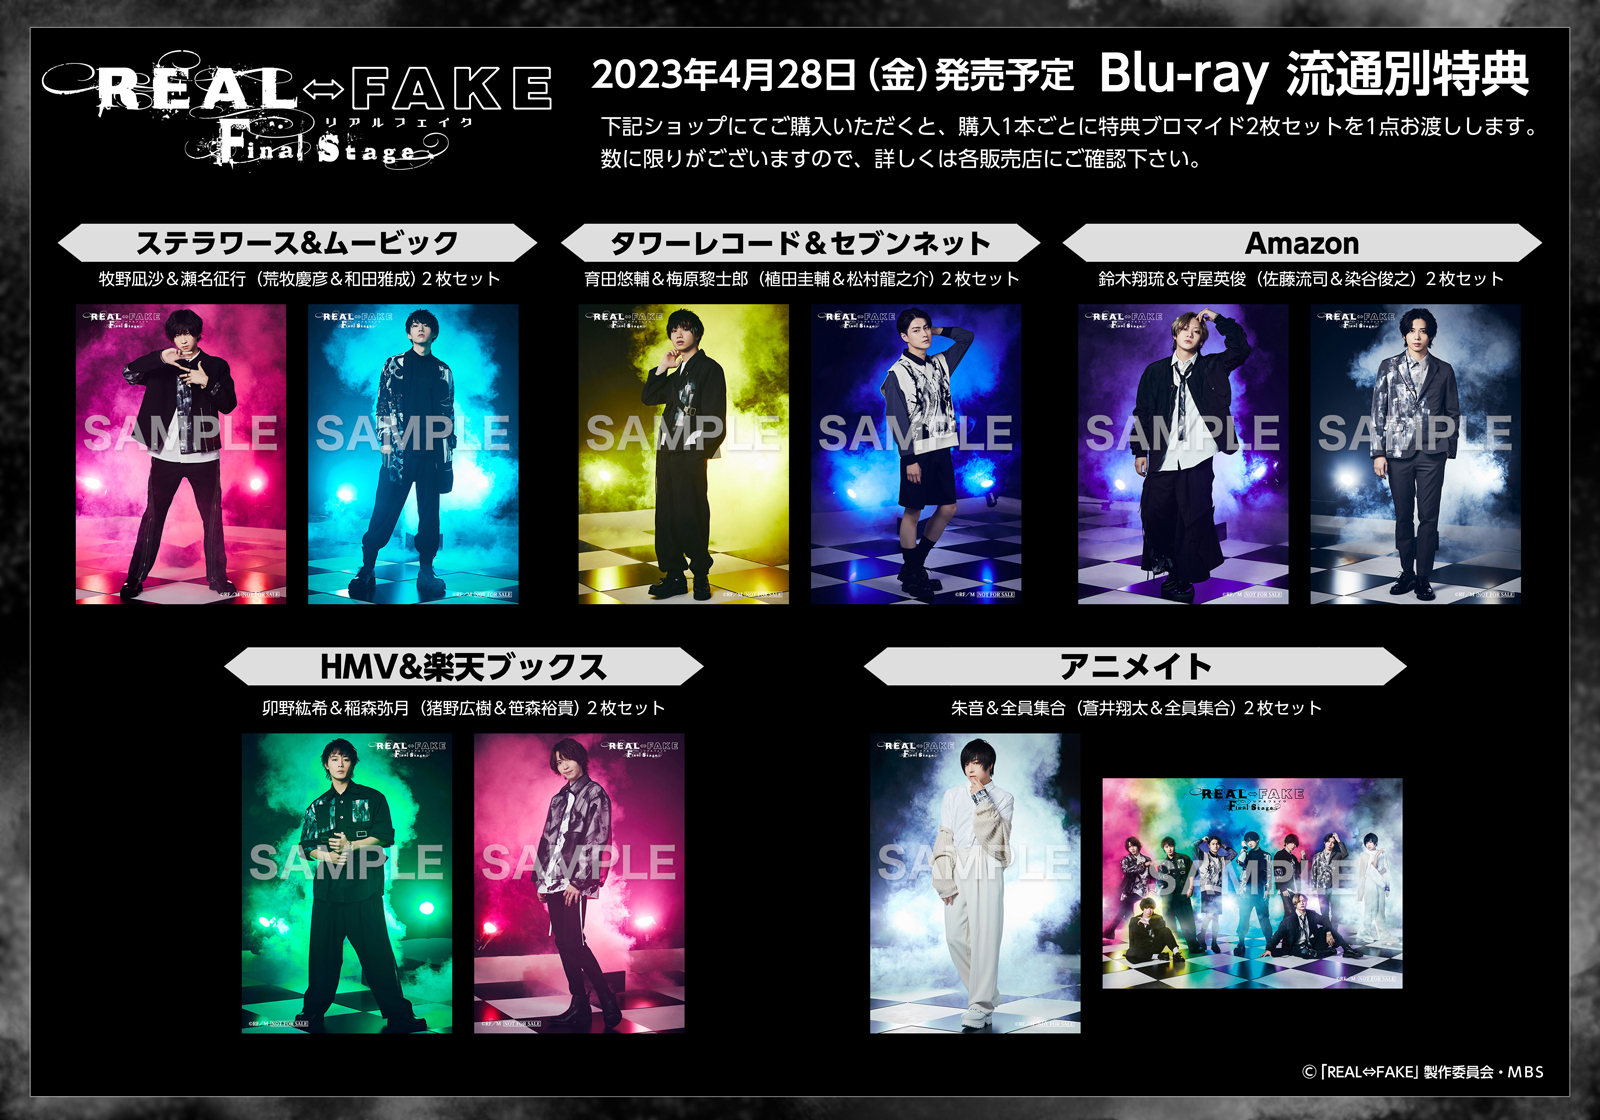 REAL⇔FAKE Final Stage』SPECIAL EVENTの開催が8月に決定 Stellar